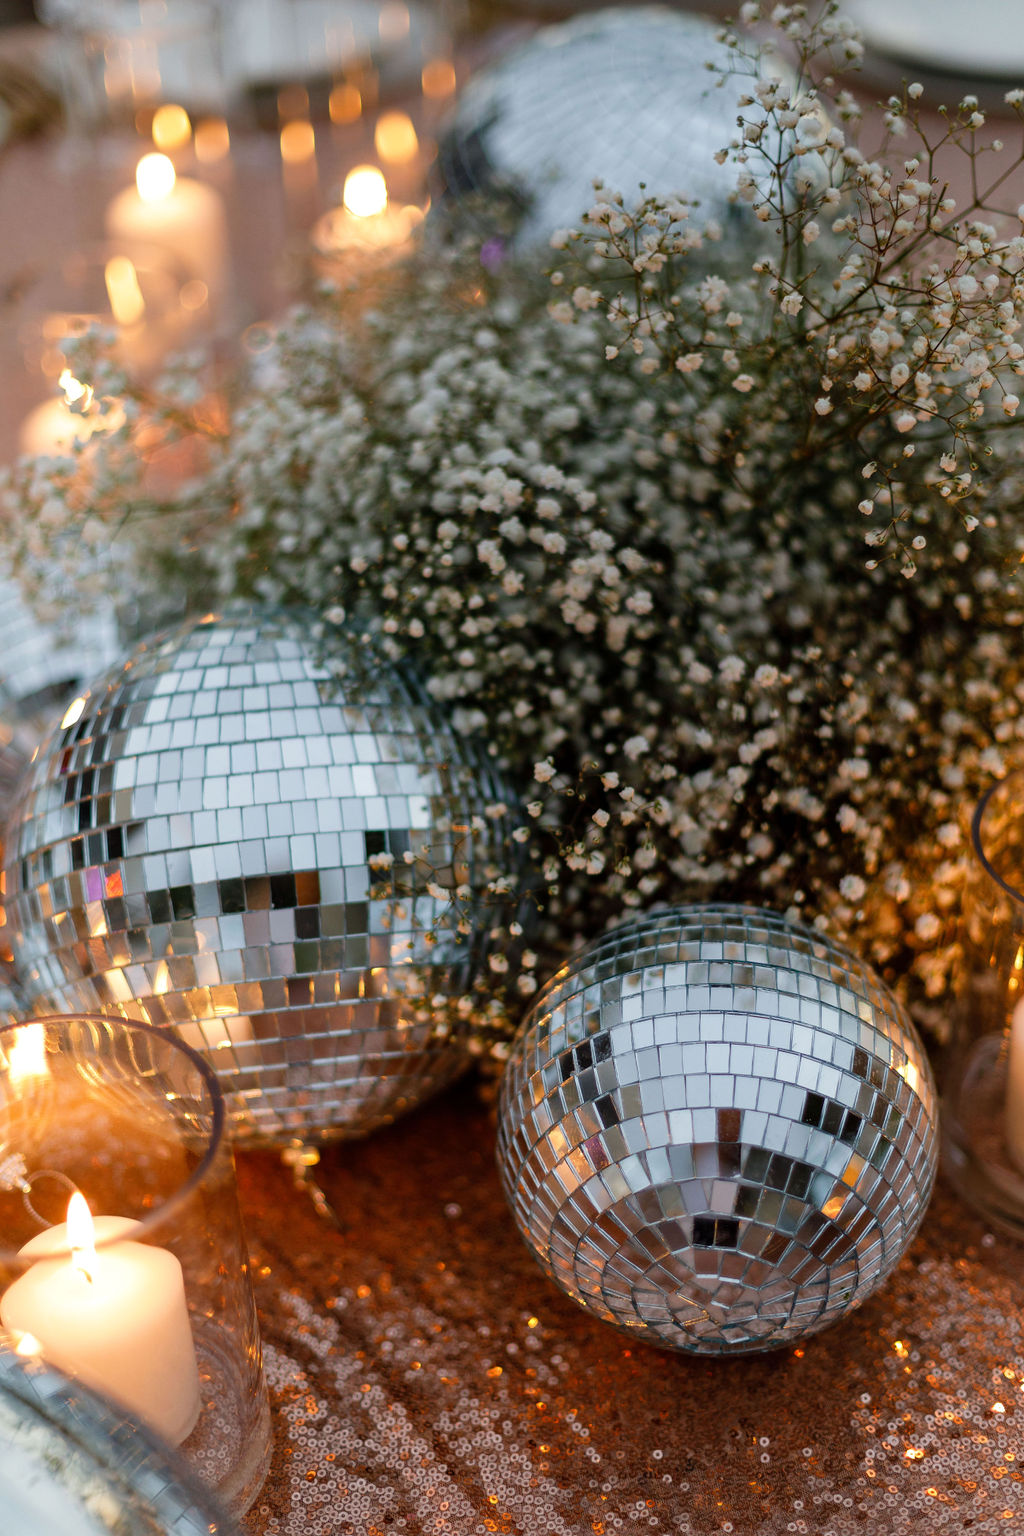 New Years Eve – a super cool disco ball crazy set up!